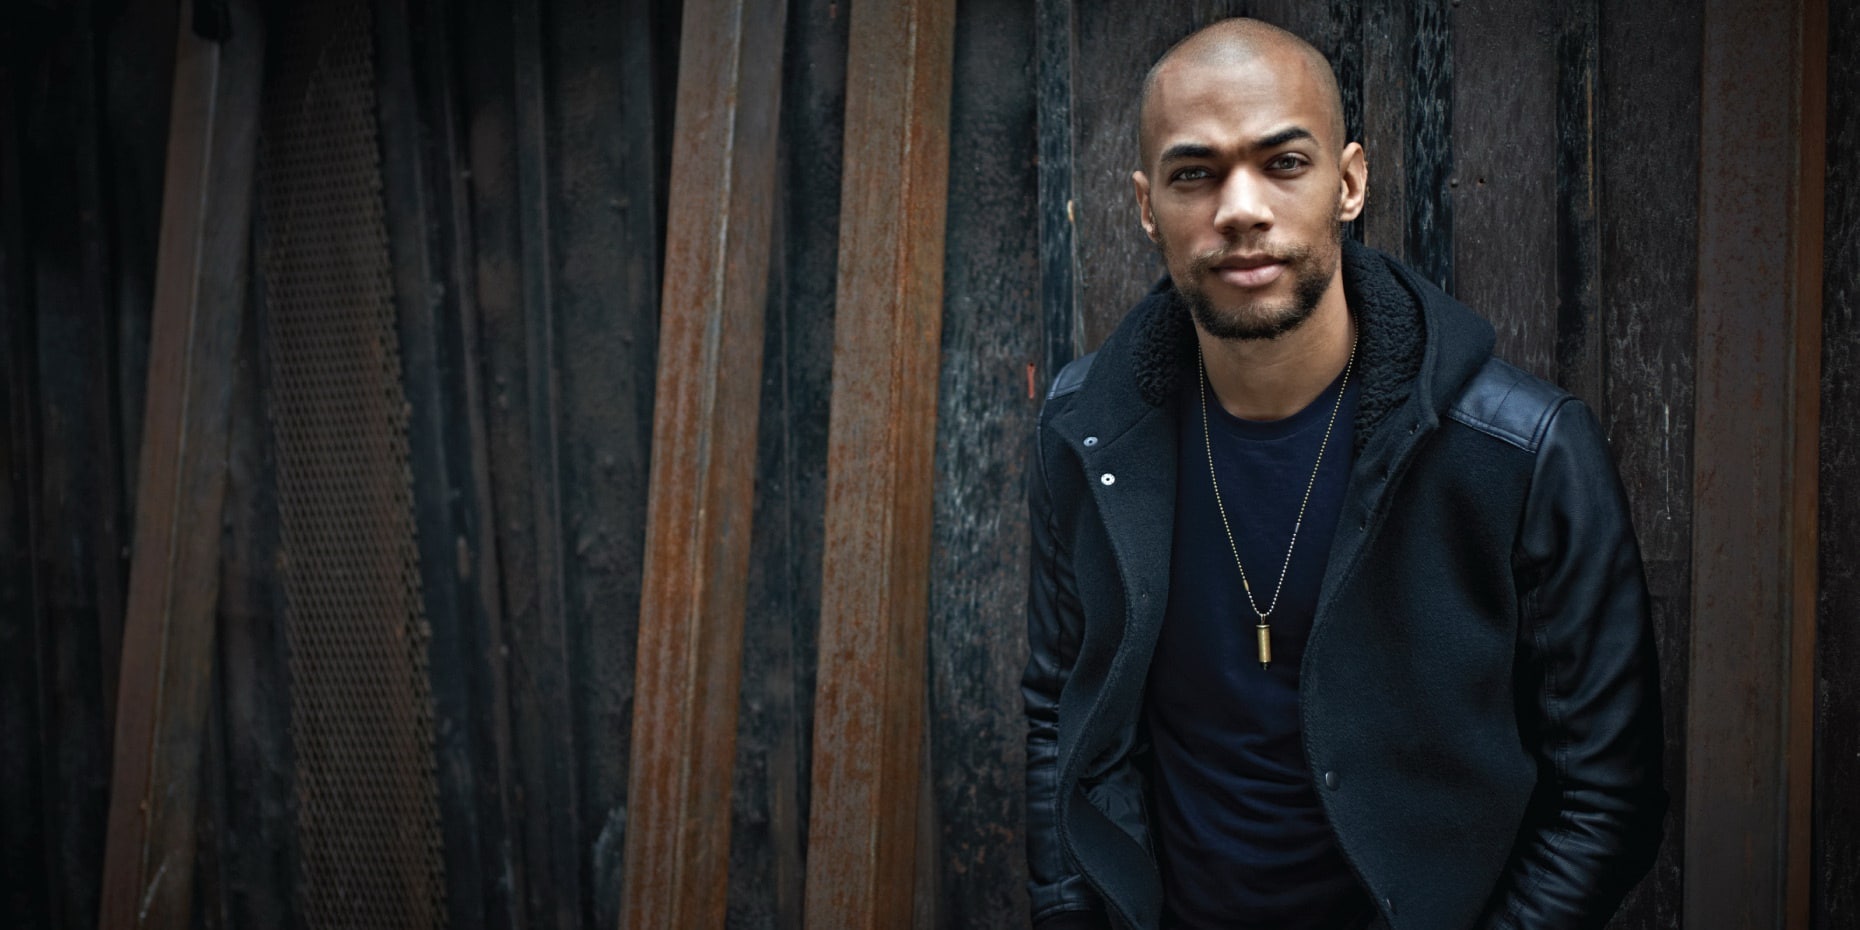 Contents1 Who is Kendrick Sampson